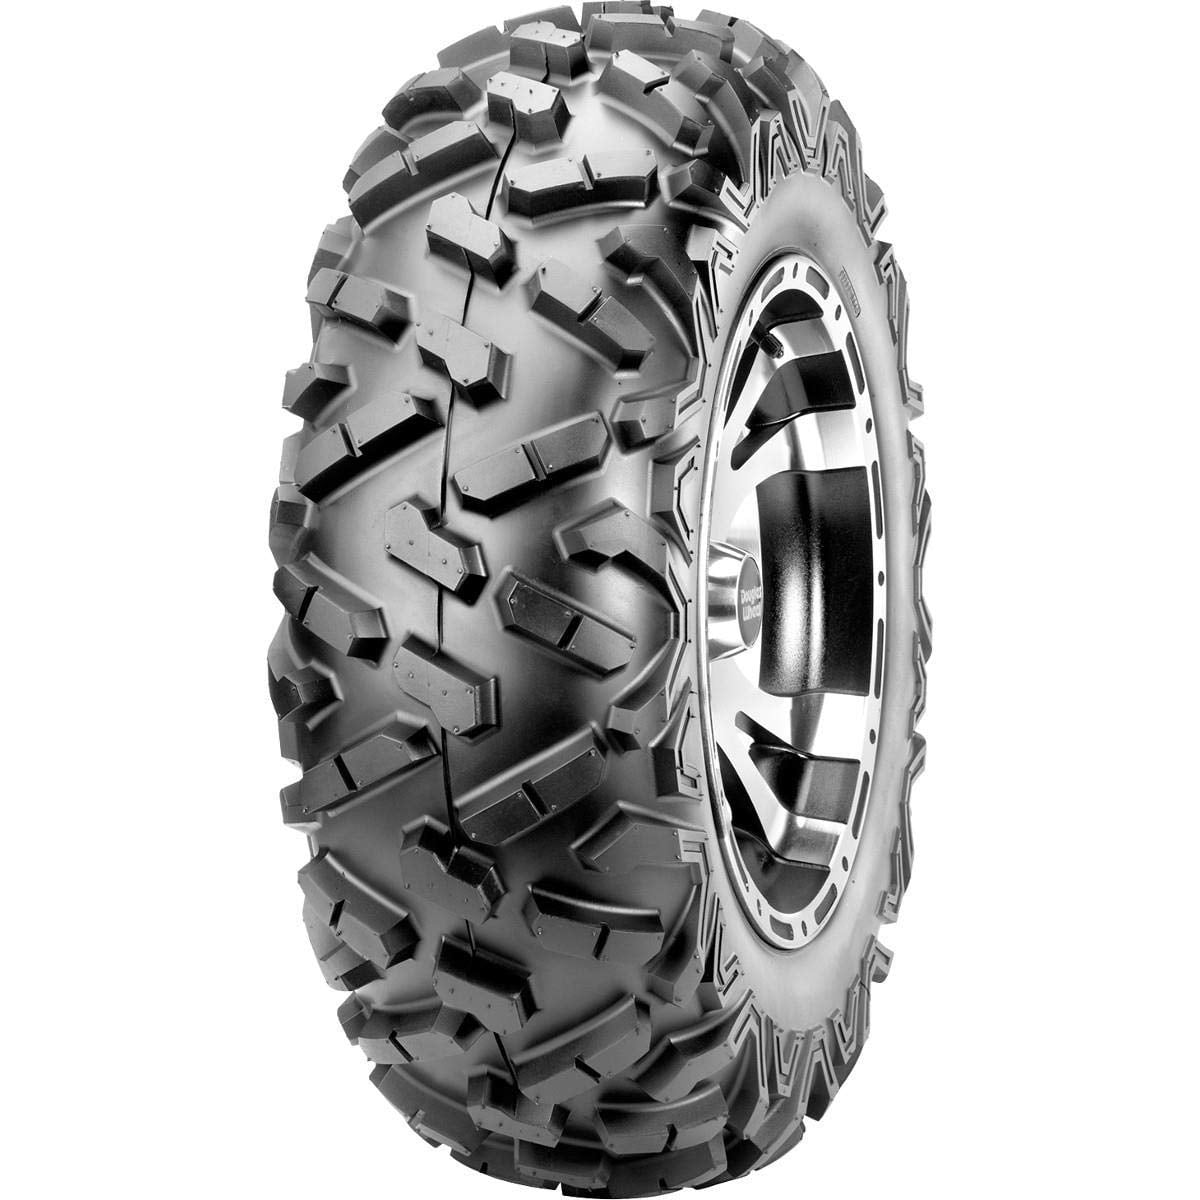 Maxxis Bighorn 2.0 front 25x8.00R12 48J 6 Ply ATV UTV Tire - Walmart Are 6 Ply Tires Good For Off Road